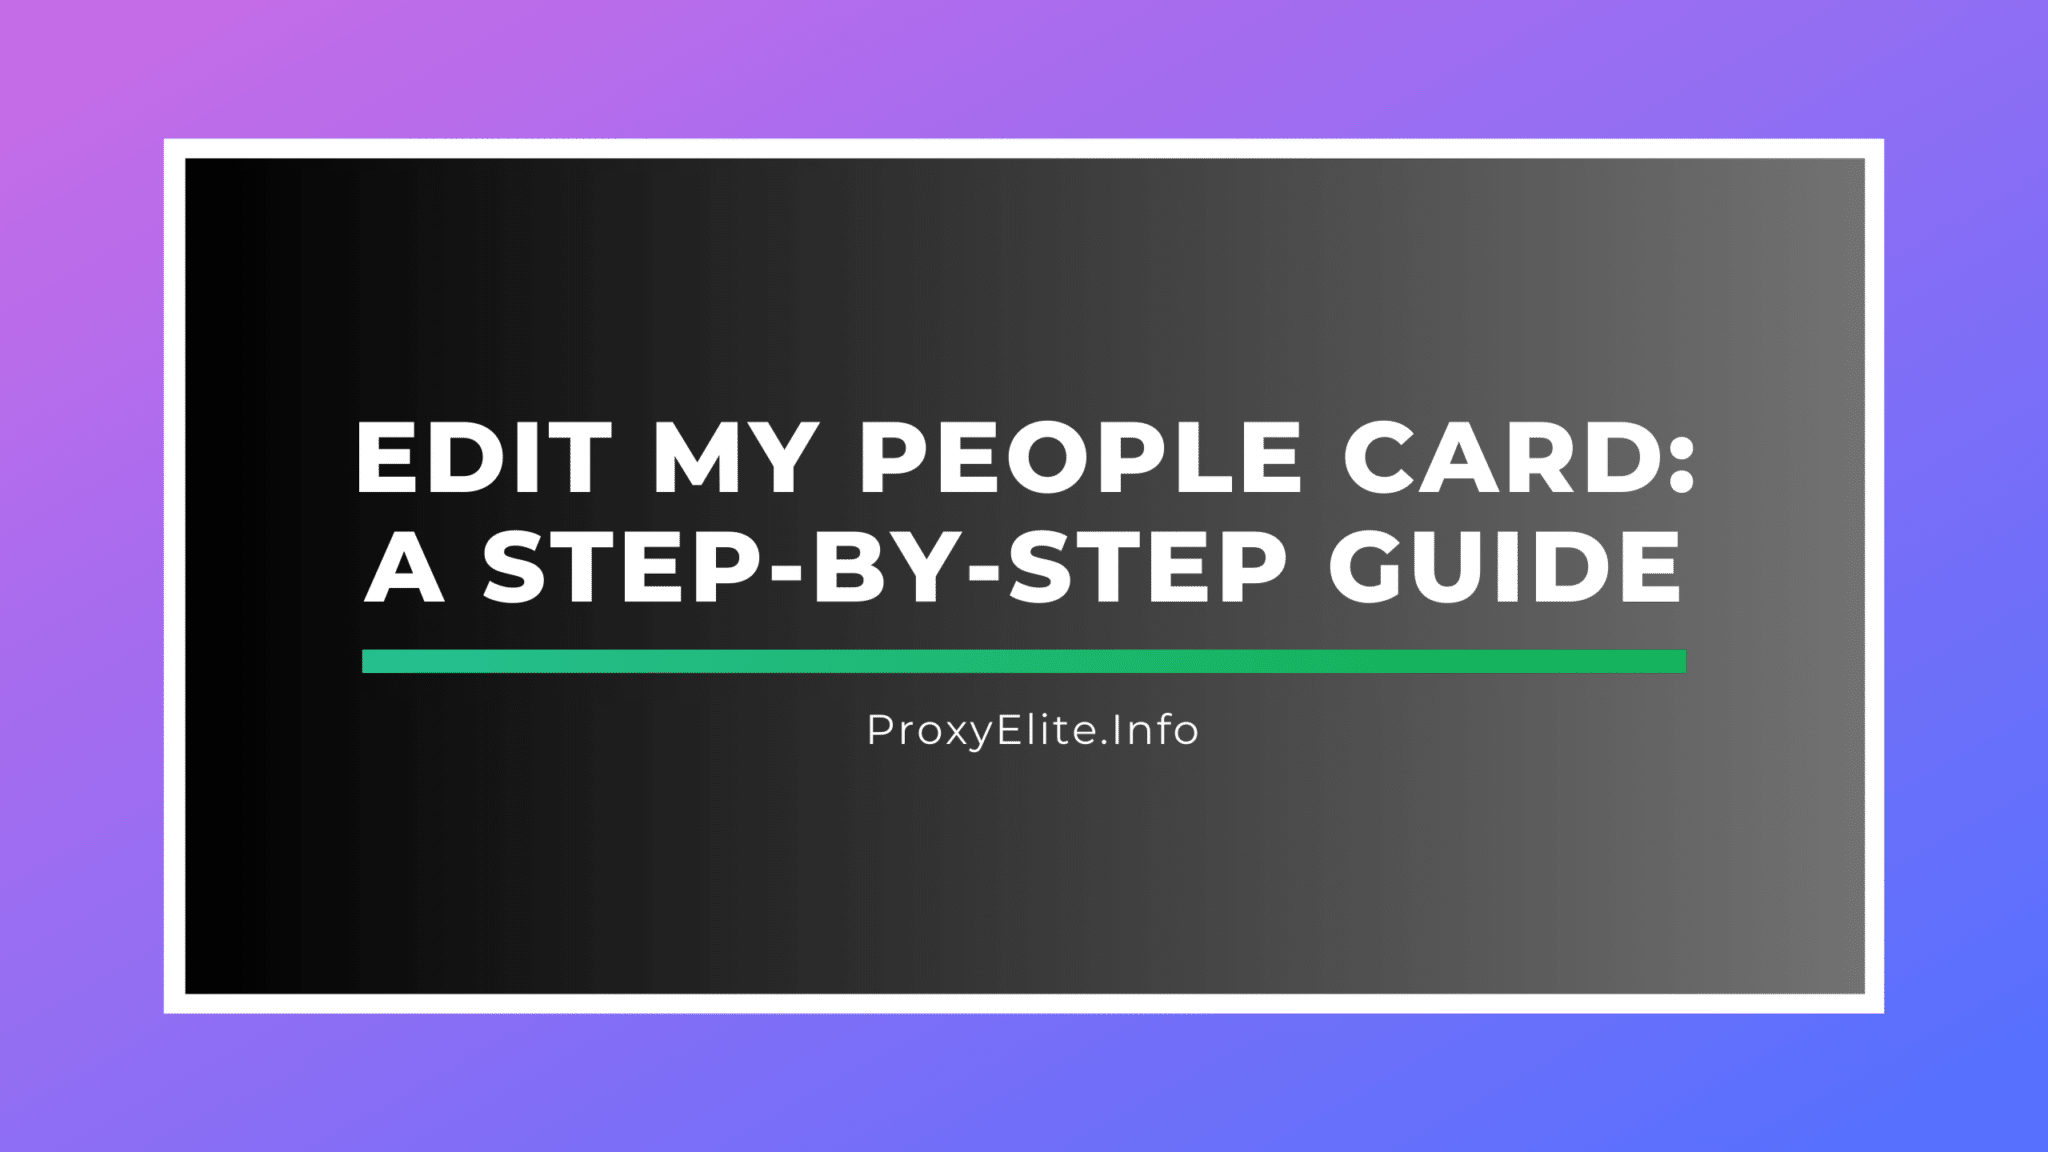 Edit My People Card: A Step-by-Step Guide